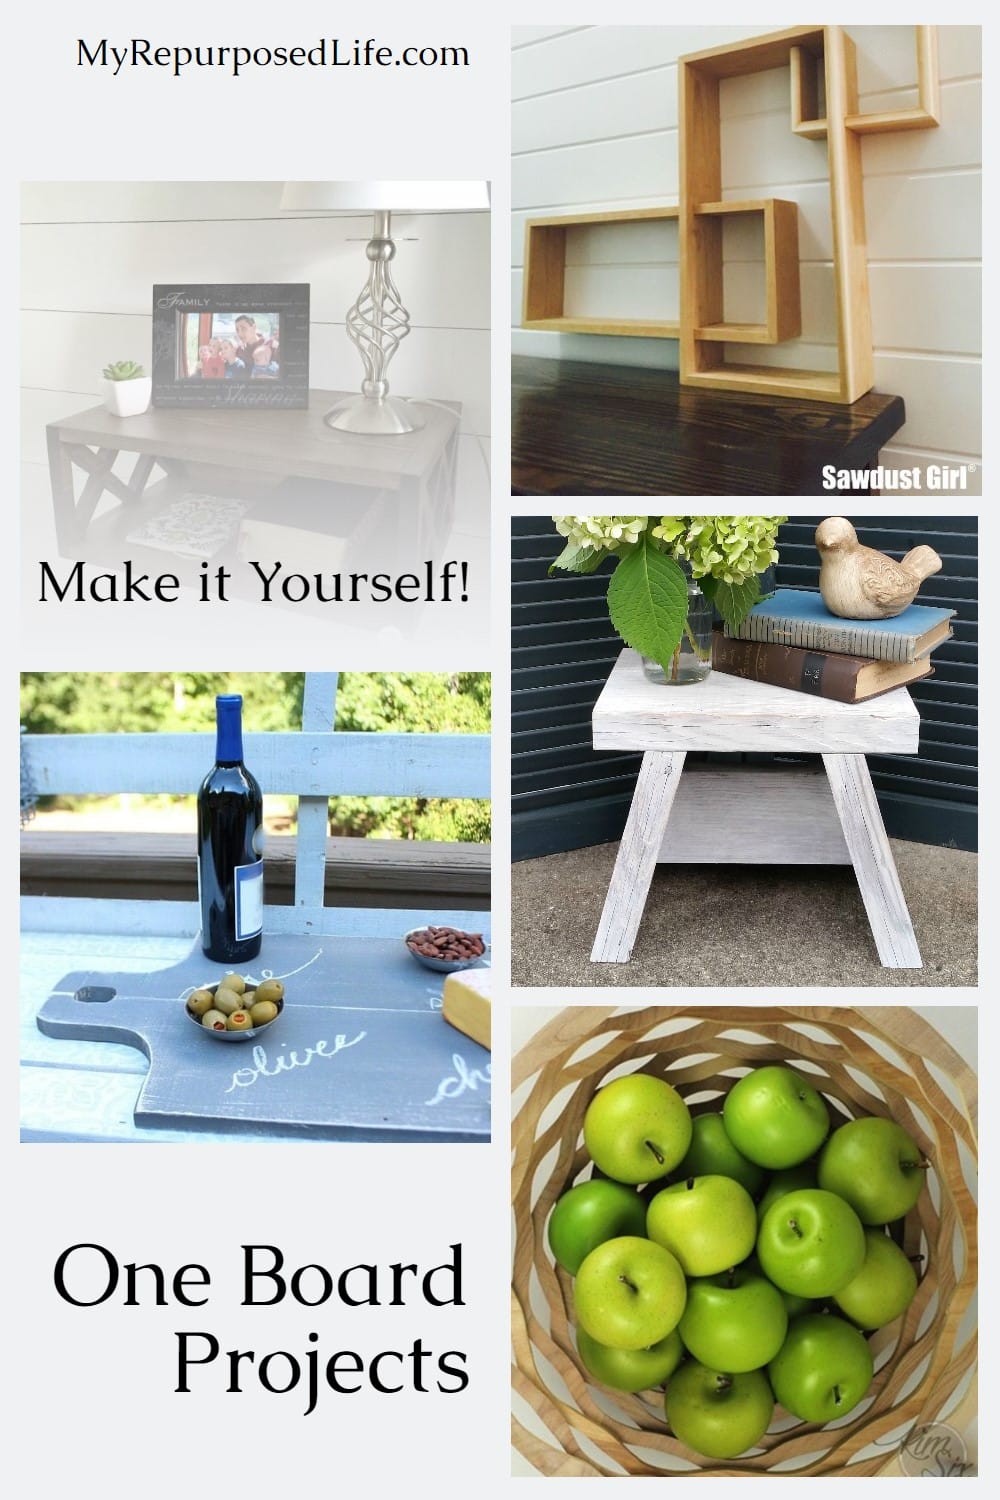 Here's a great collection of one board projects to inspire you to DIY. Ideas to make projects out of a single board. What will you make? #MyRepurposedLife #oneboard via @repurposedlife